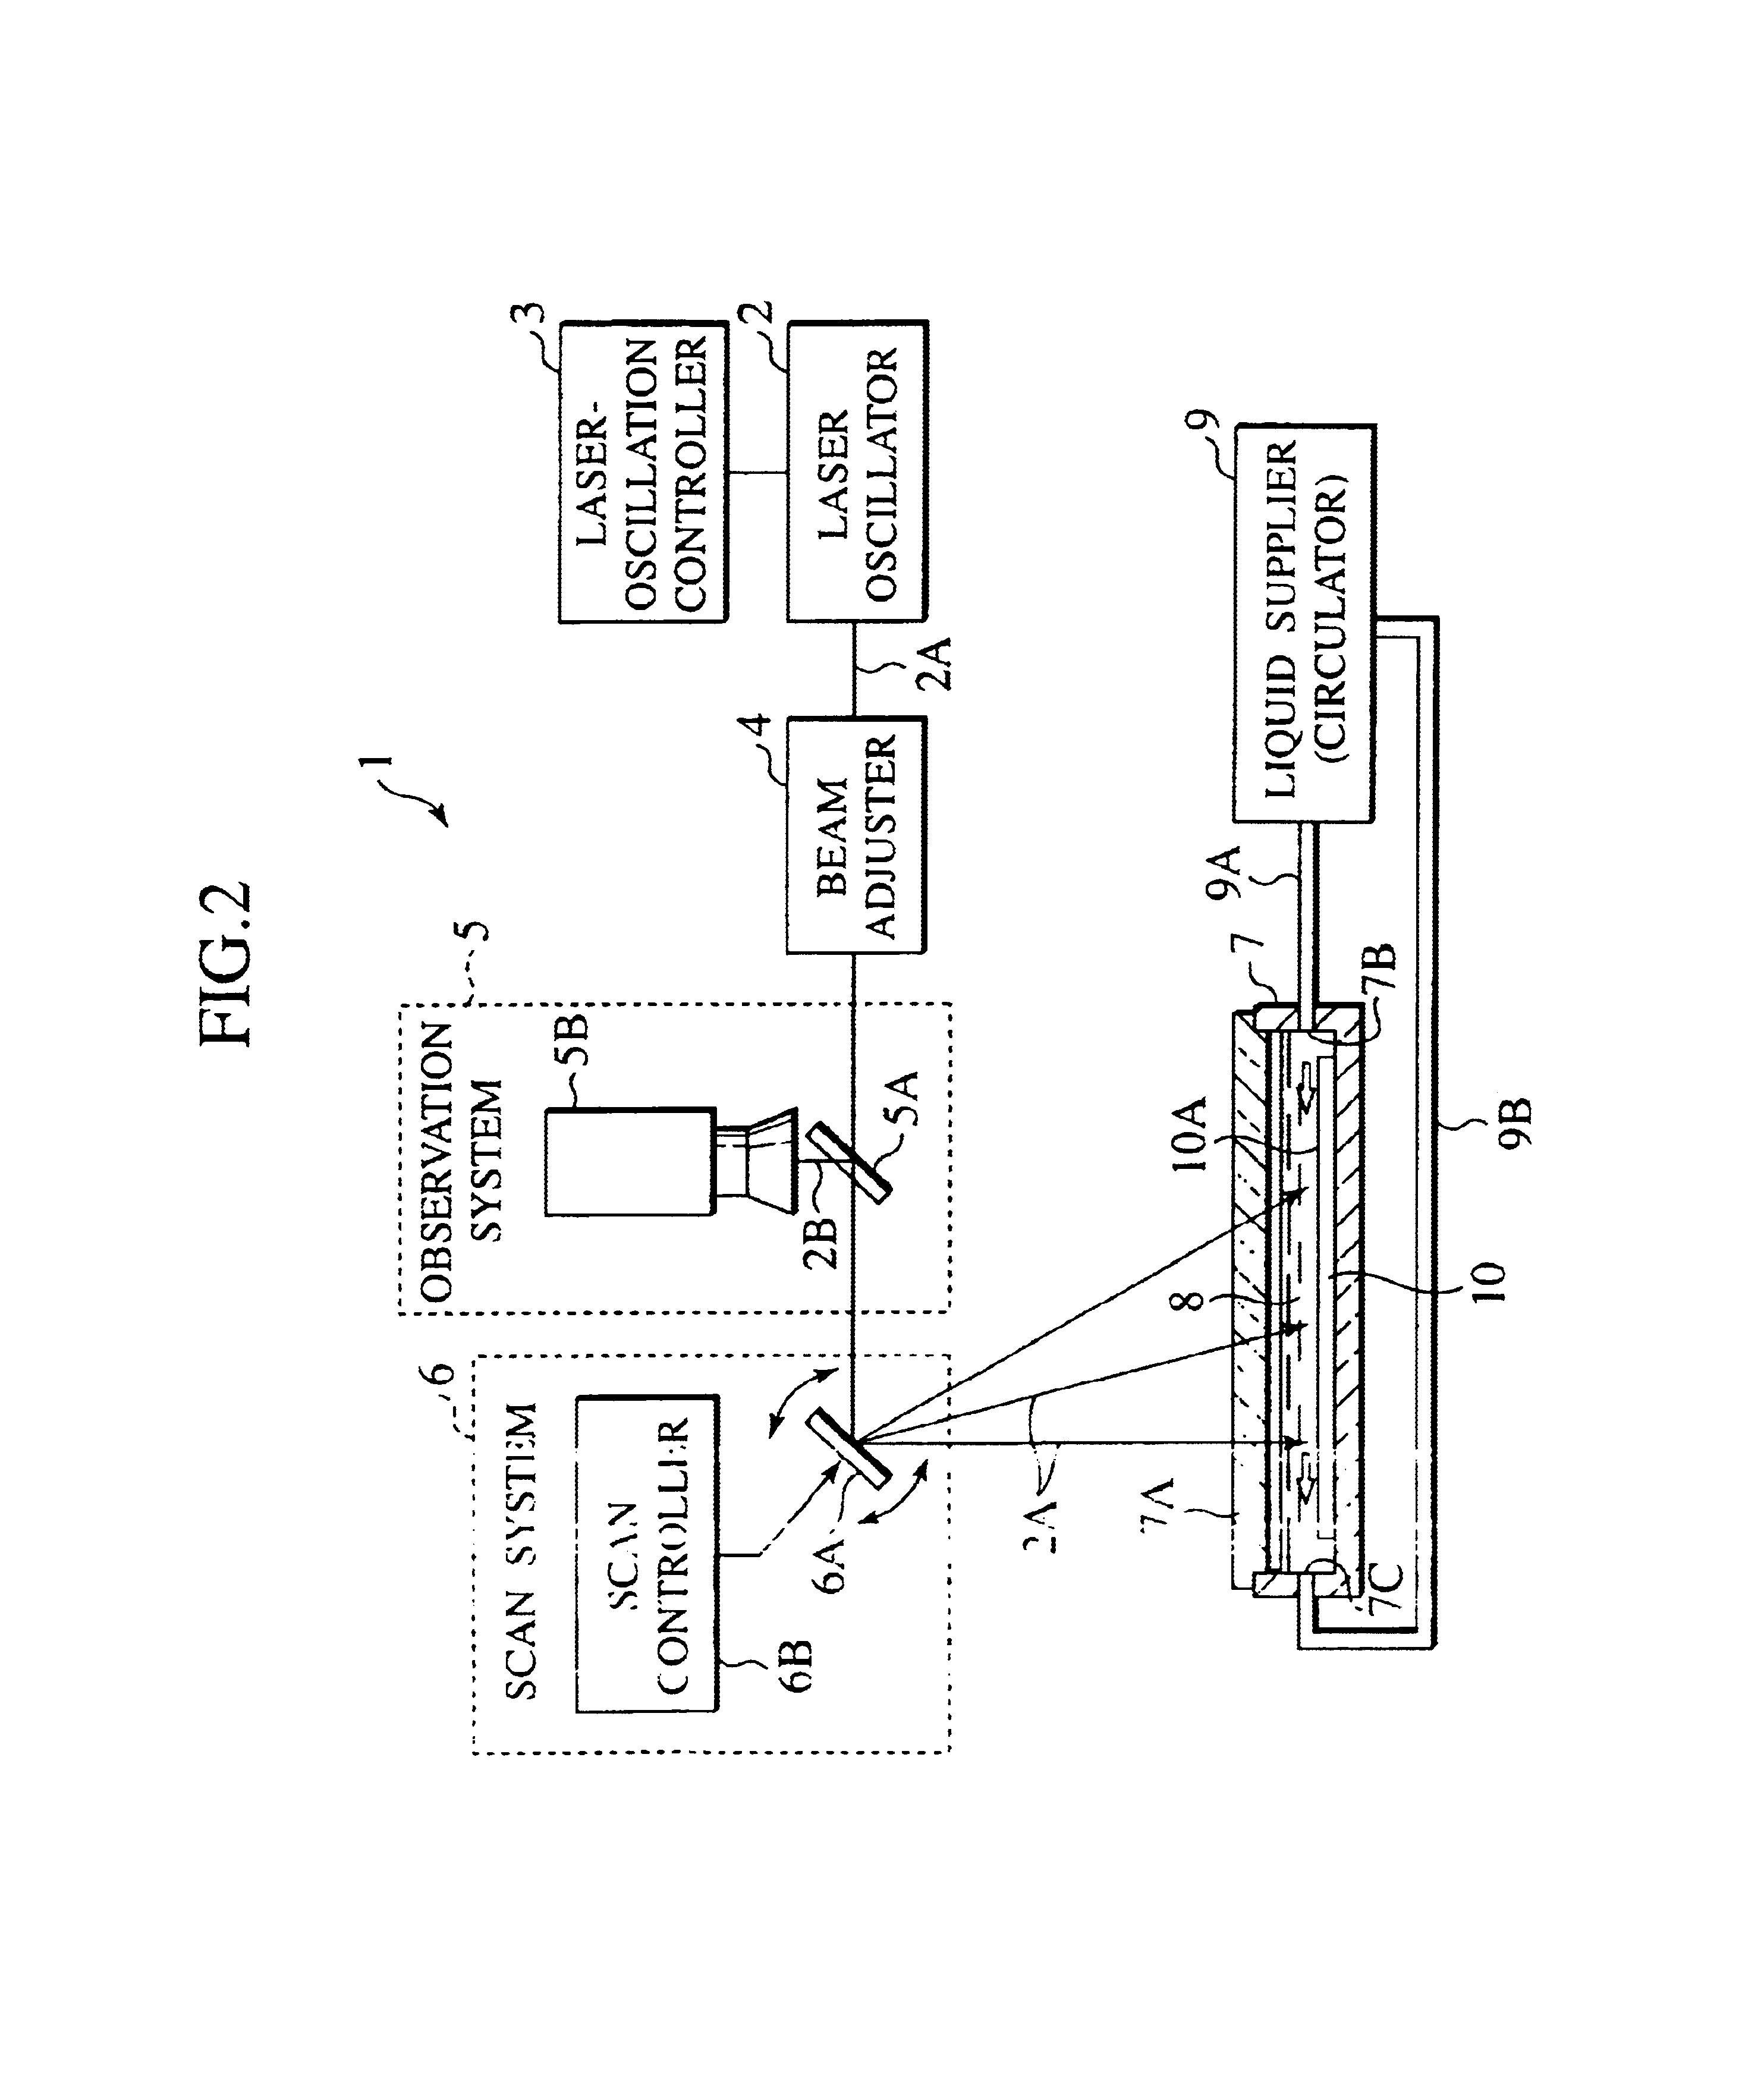 Apparatus and method for laser beam machining, and method for manufacturing semiconductor devices using laser beam machining